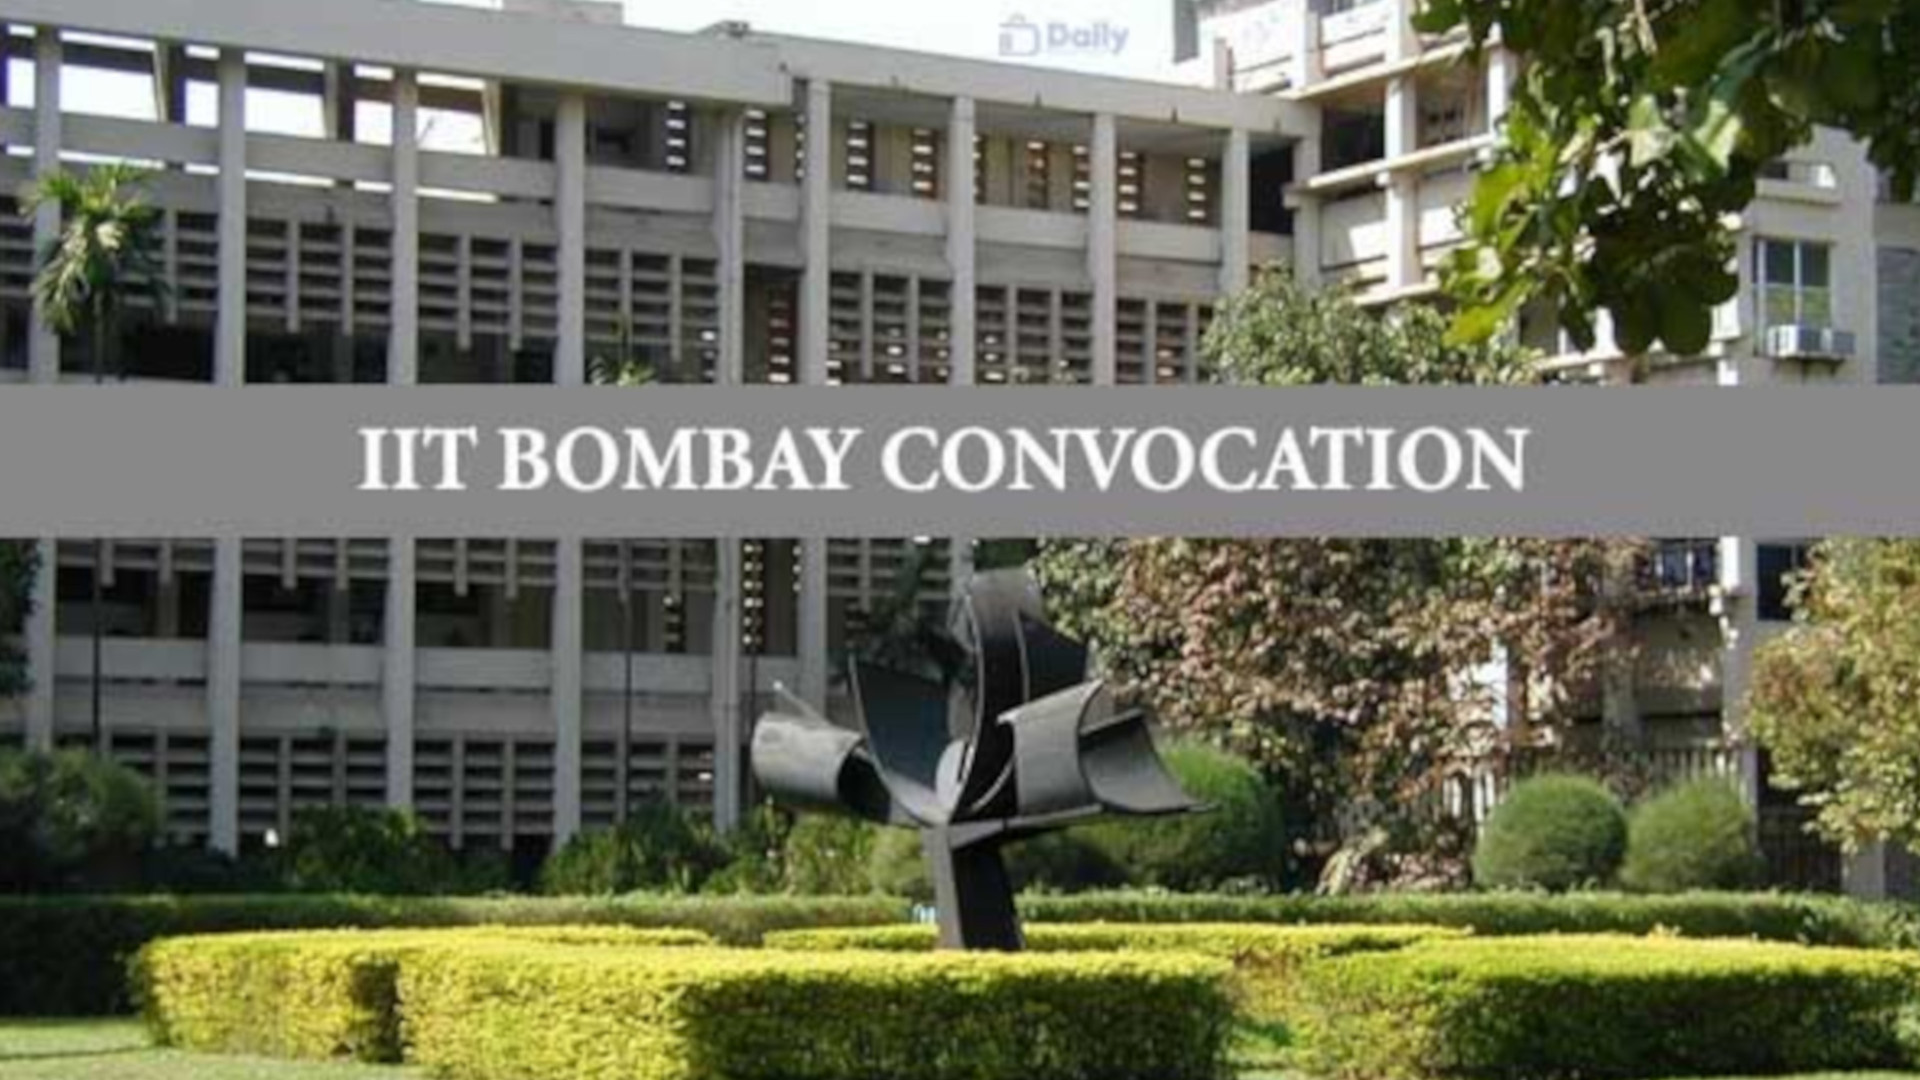 60th Convocation Ceremony for IIT Bombay’s 2022 Graduating Batch of Students